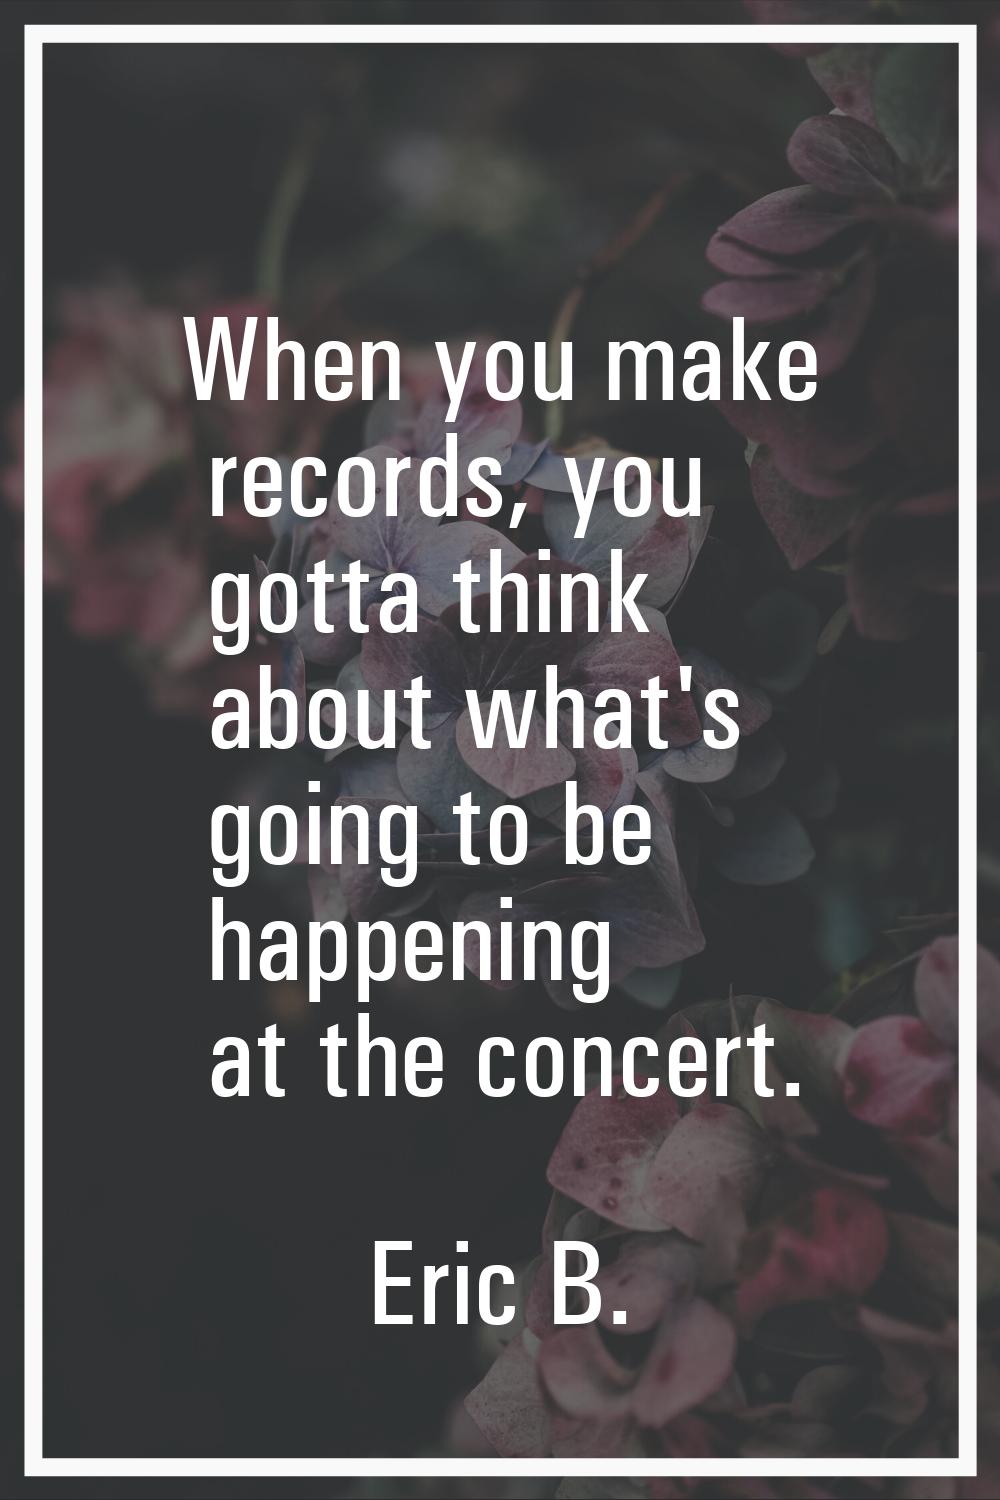 When you make records, you gotta think about what's going to be happening at the concert.